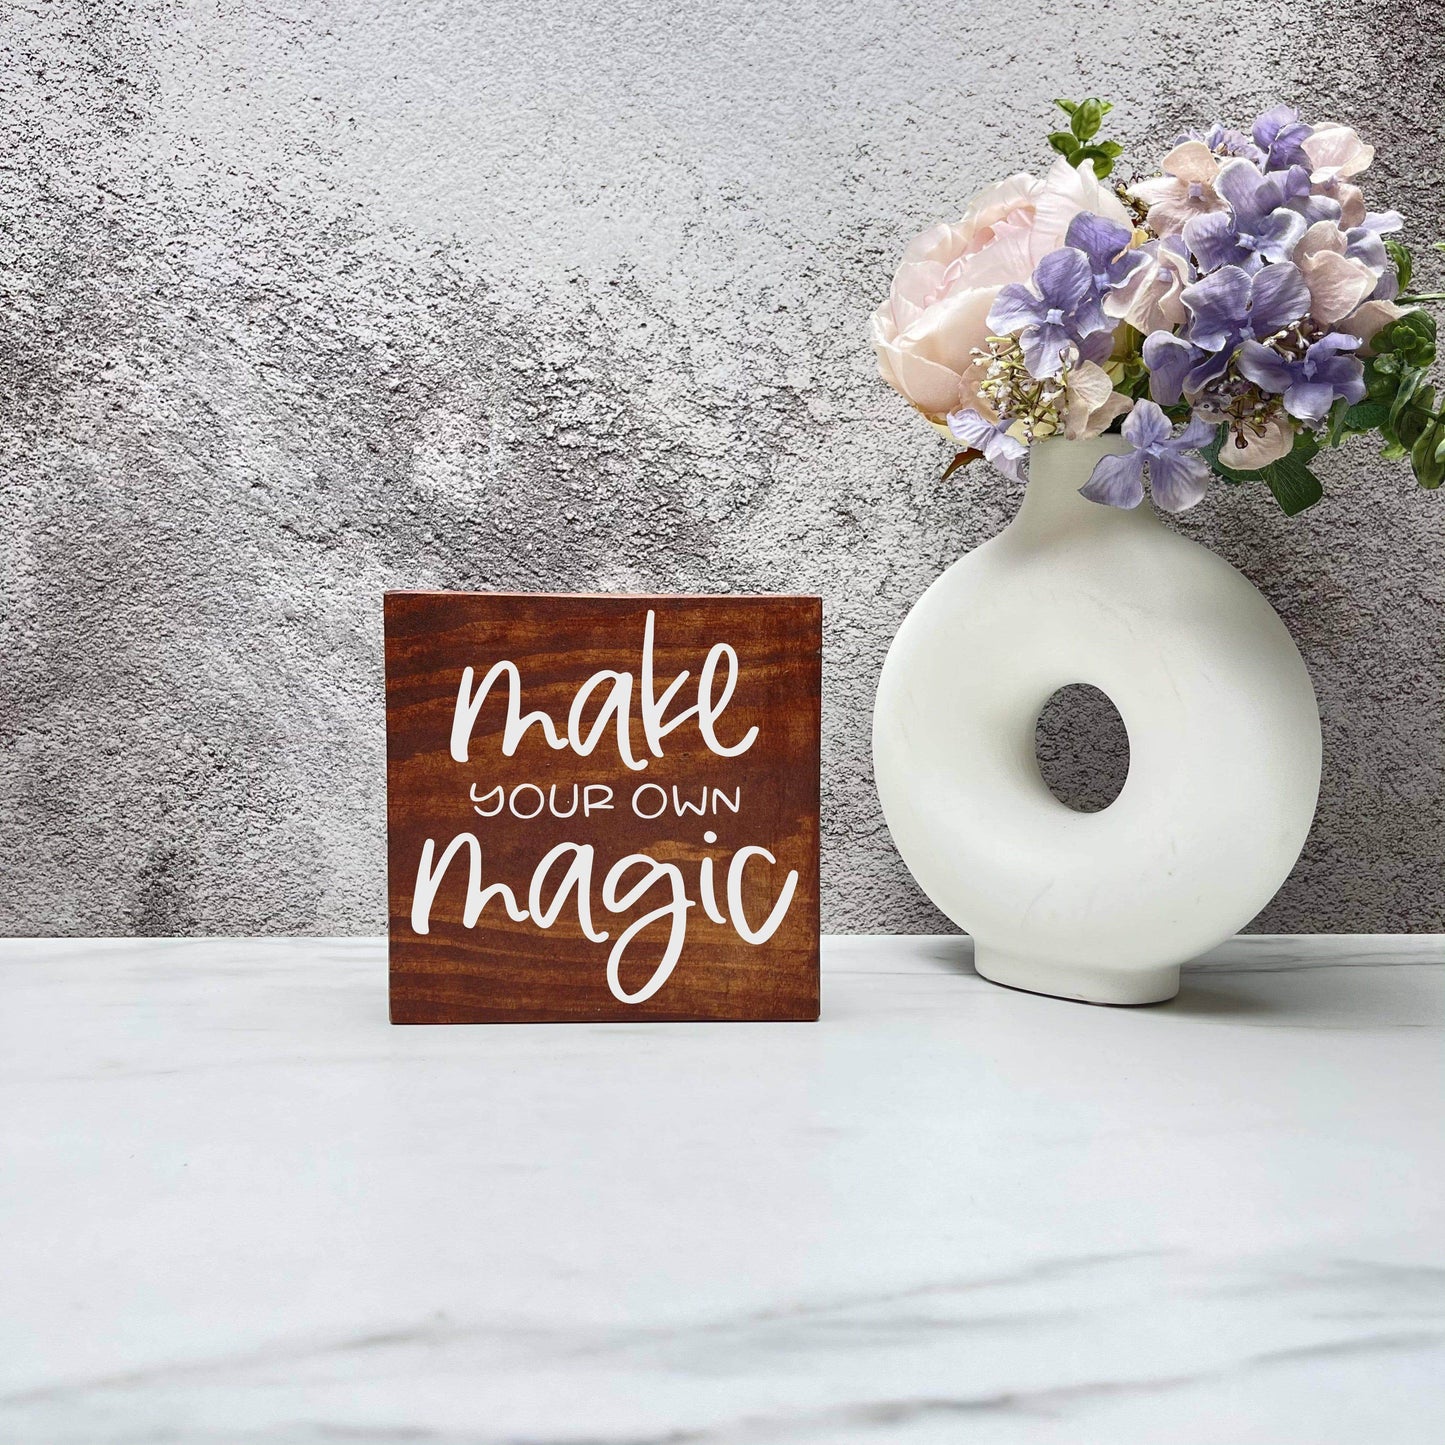 Make your Own Magic wood sign, quote sign, rustic decor, home decor